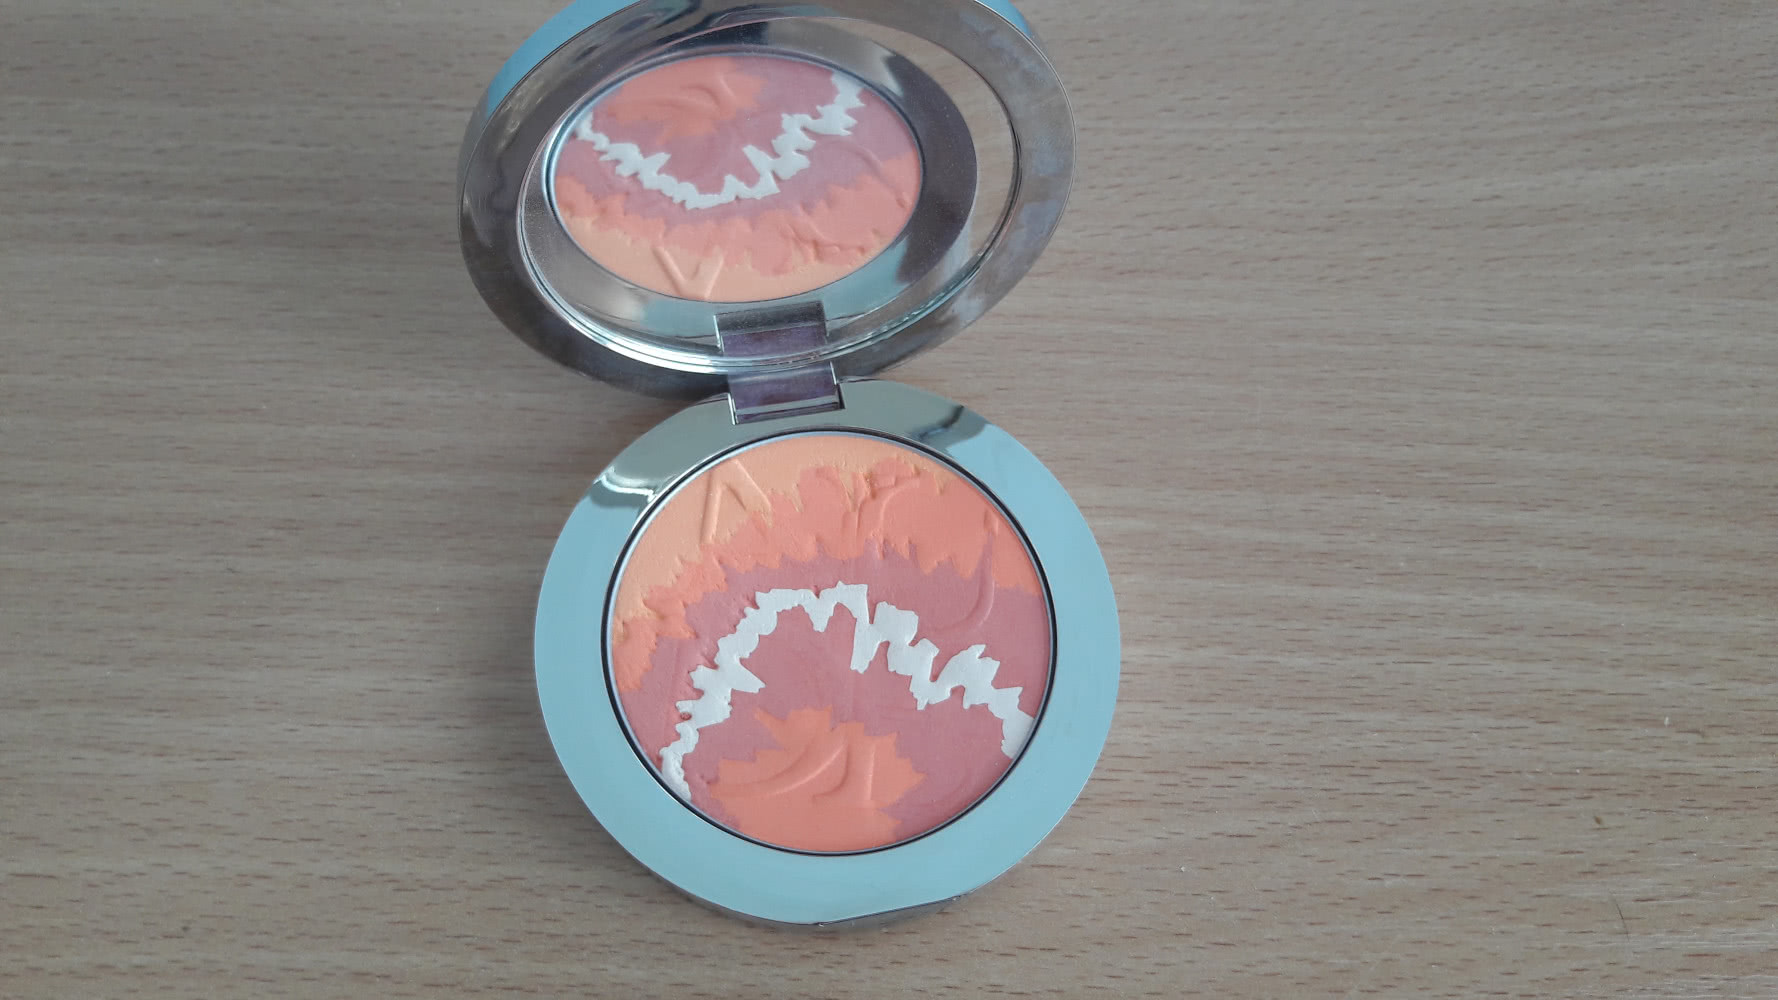 Diorskin Nude Tan Tie Dye Edition Blush Harmony Limited Edition 002Coral Sunset СНИЗИЛА ЦЕНУ